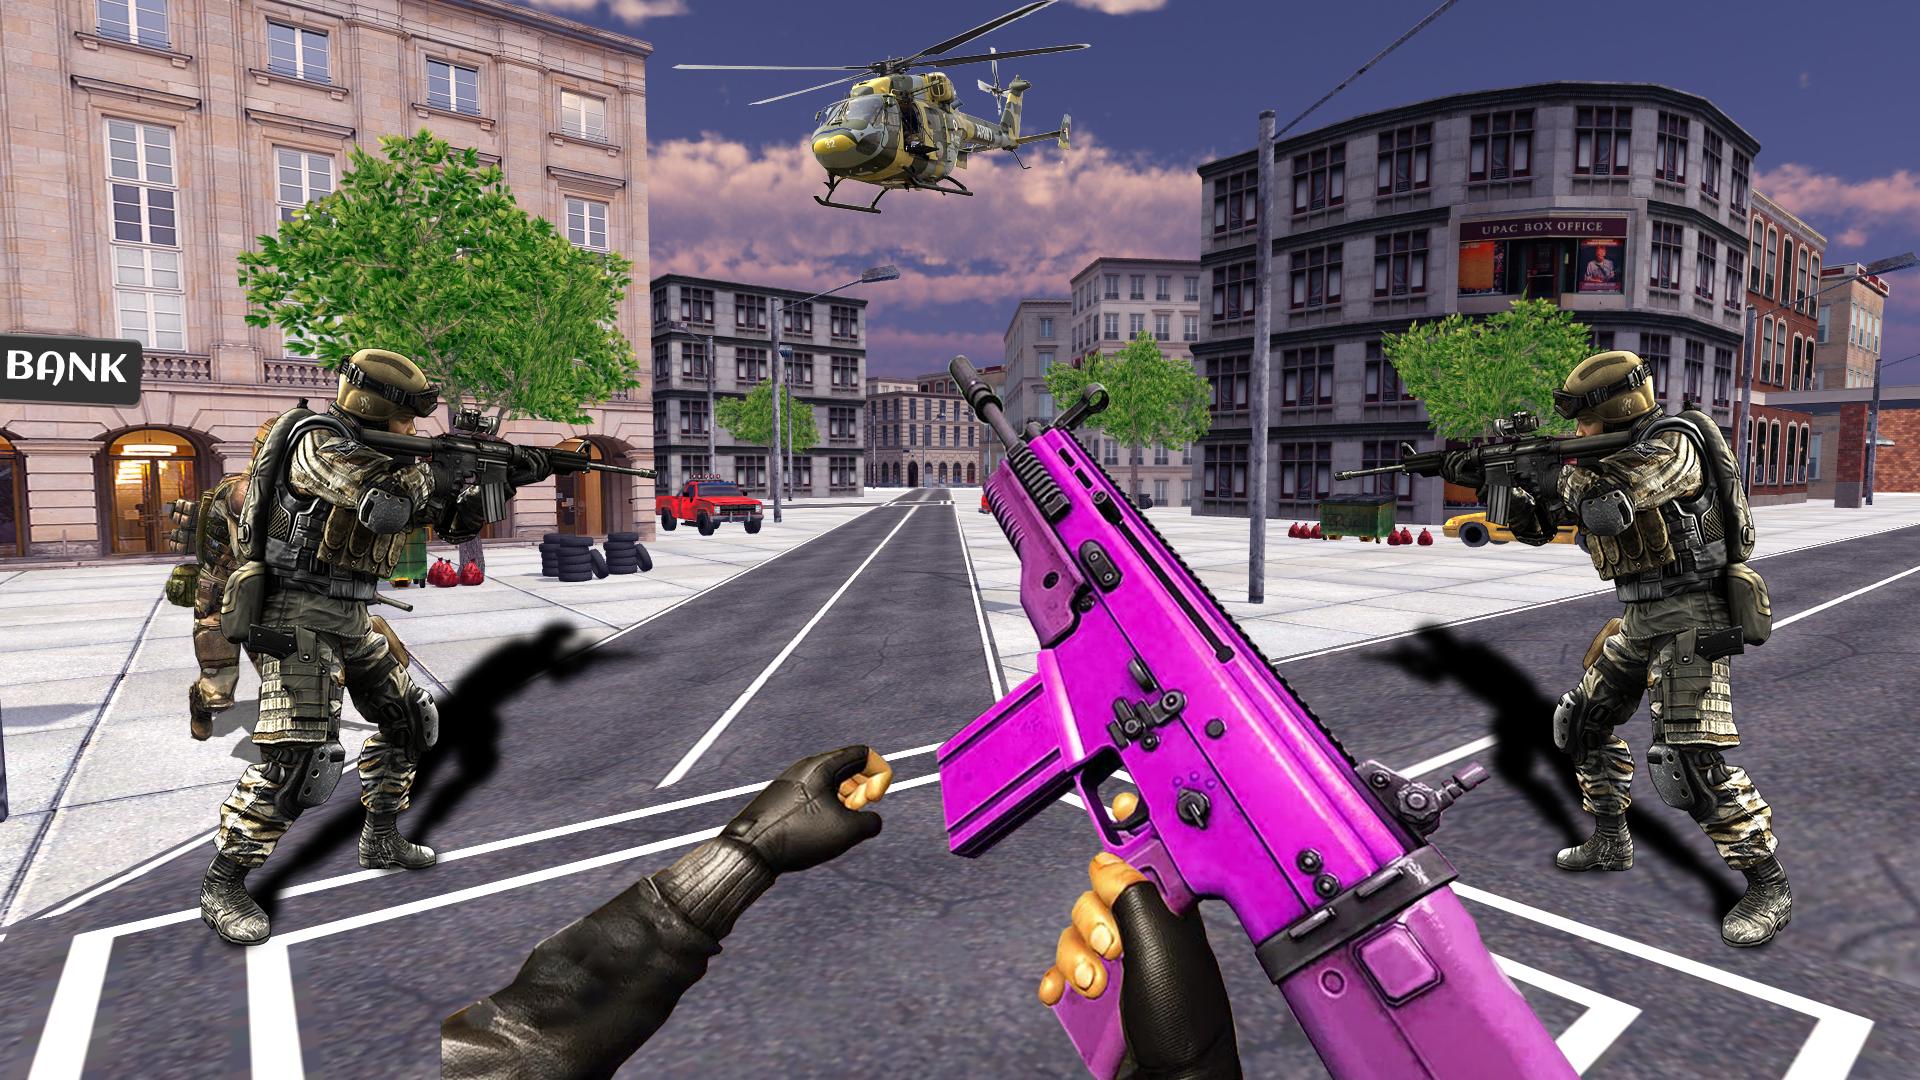 Download Real Commando Secret Mission - Free Shooting Games on PC with MEmu